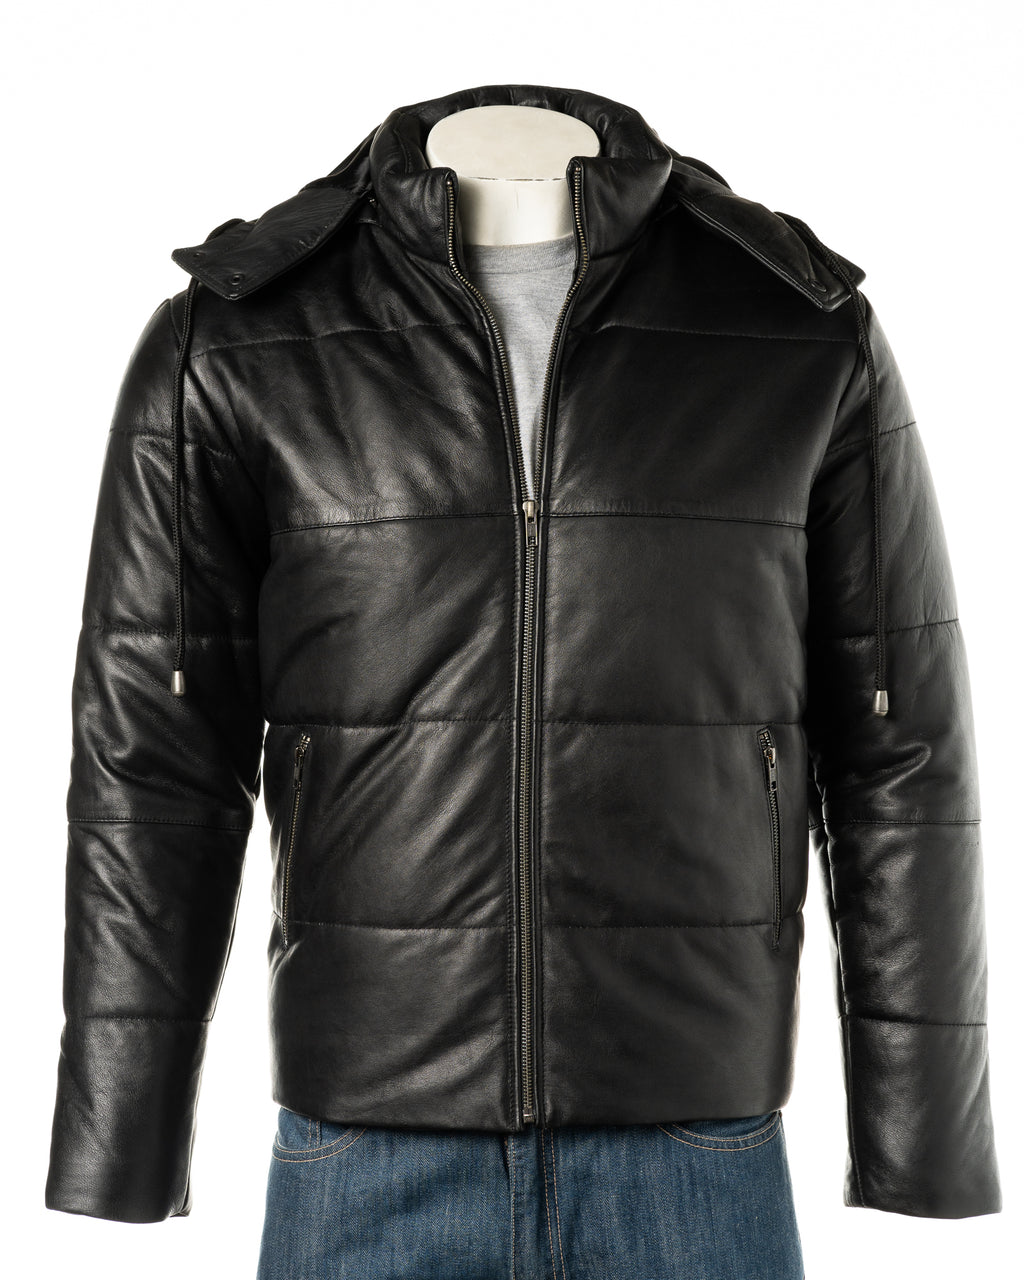 Men's Black Leather Puffer Jacket With Detachable Hood: Dino